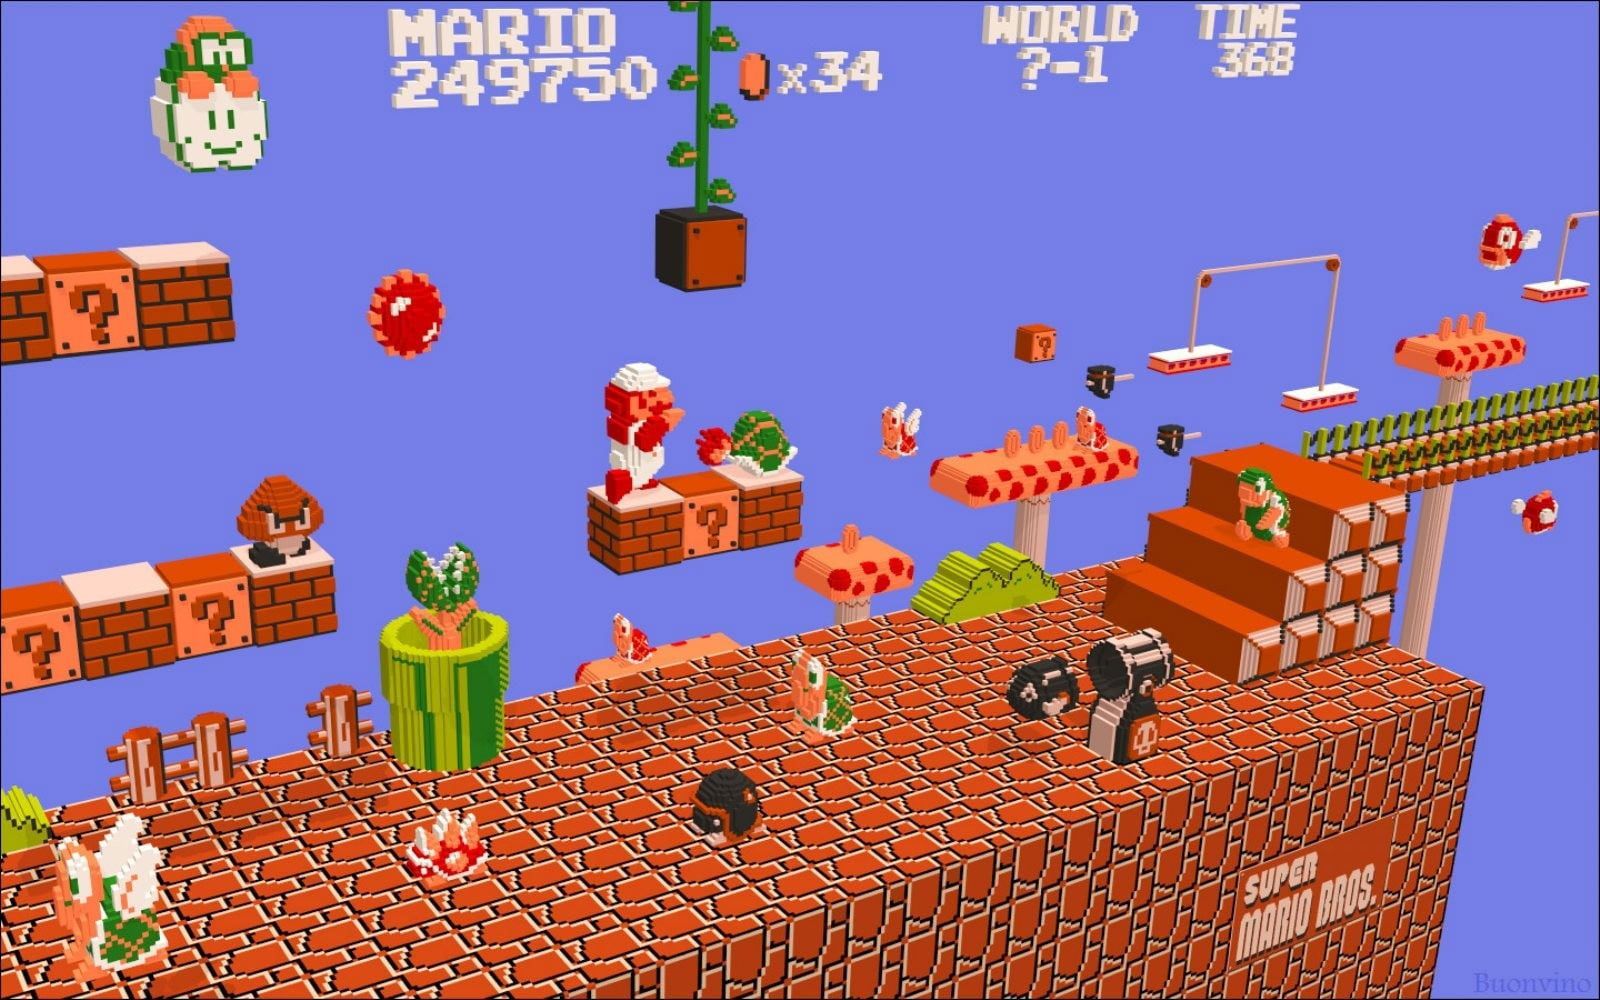 Super Mario Bros. is a 1985 platform video game developed and published by Nintendo. - Nintendo